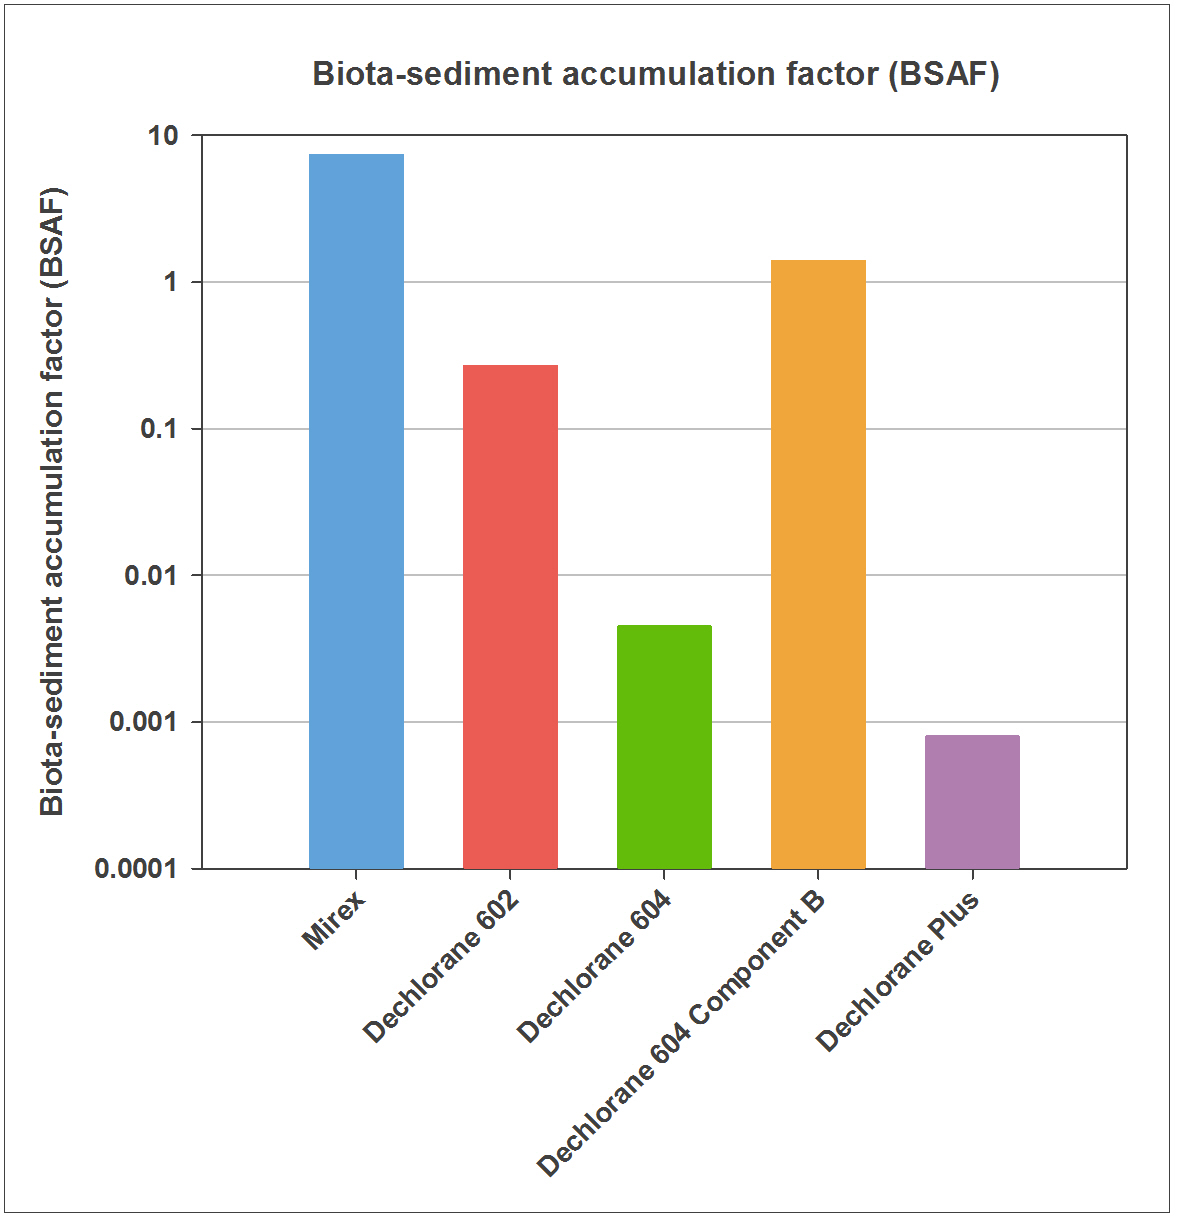 Figure 5: Bar graph showing the biota-sediment accumulation factor (BSAF) for several dechlorane compounds in Lake Ontario Lake Trout and sediment on a logarithmic scale, meaning for example that the BSAF for Dechlorane 604 Component B is more than 2 orders of magnitude greater (300 times) than the parent compound Dechlorane 604. The BSAF calculation shows the potential of a chemical to bioaccumulate in fish.